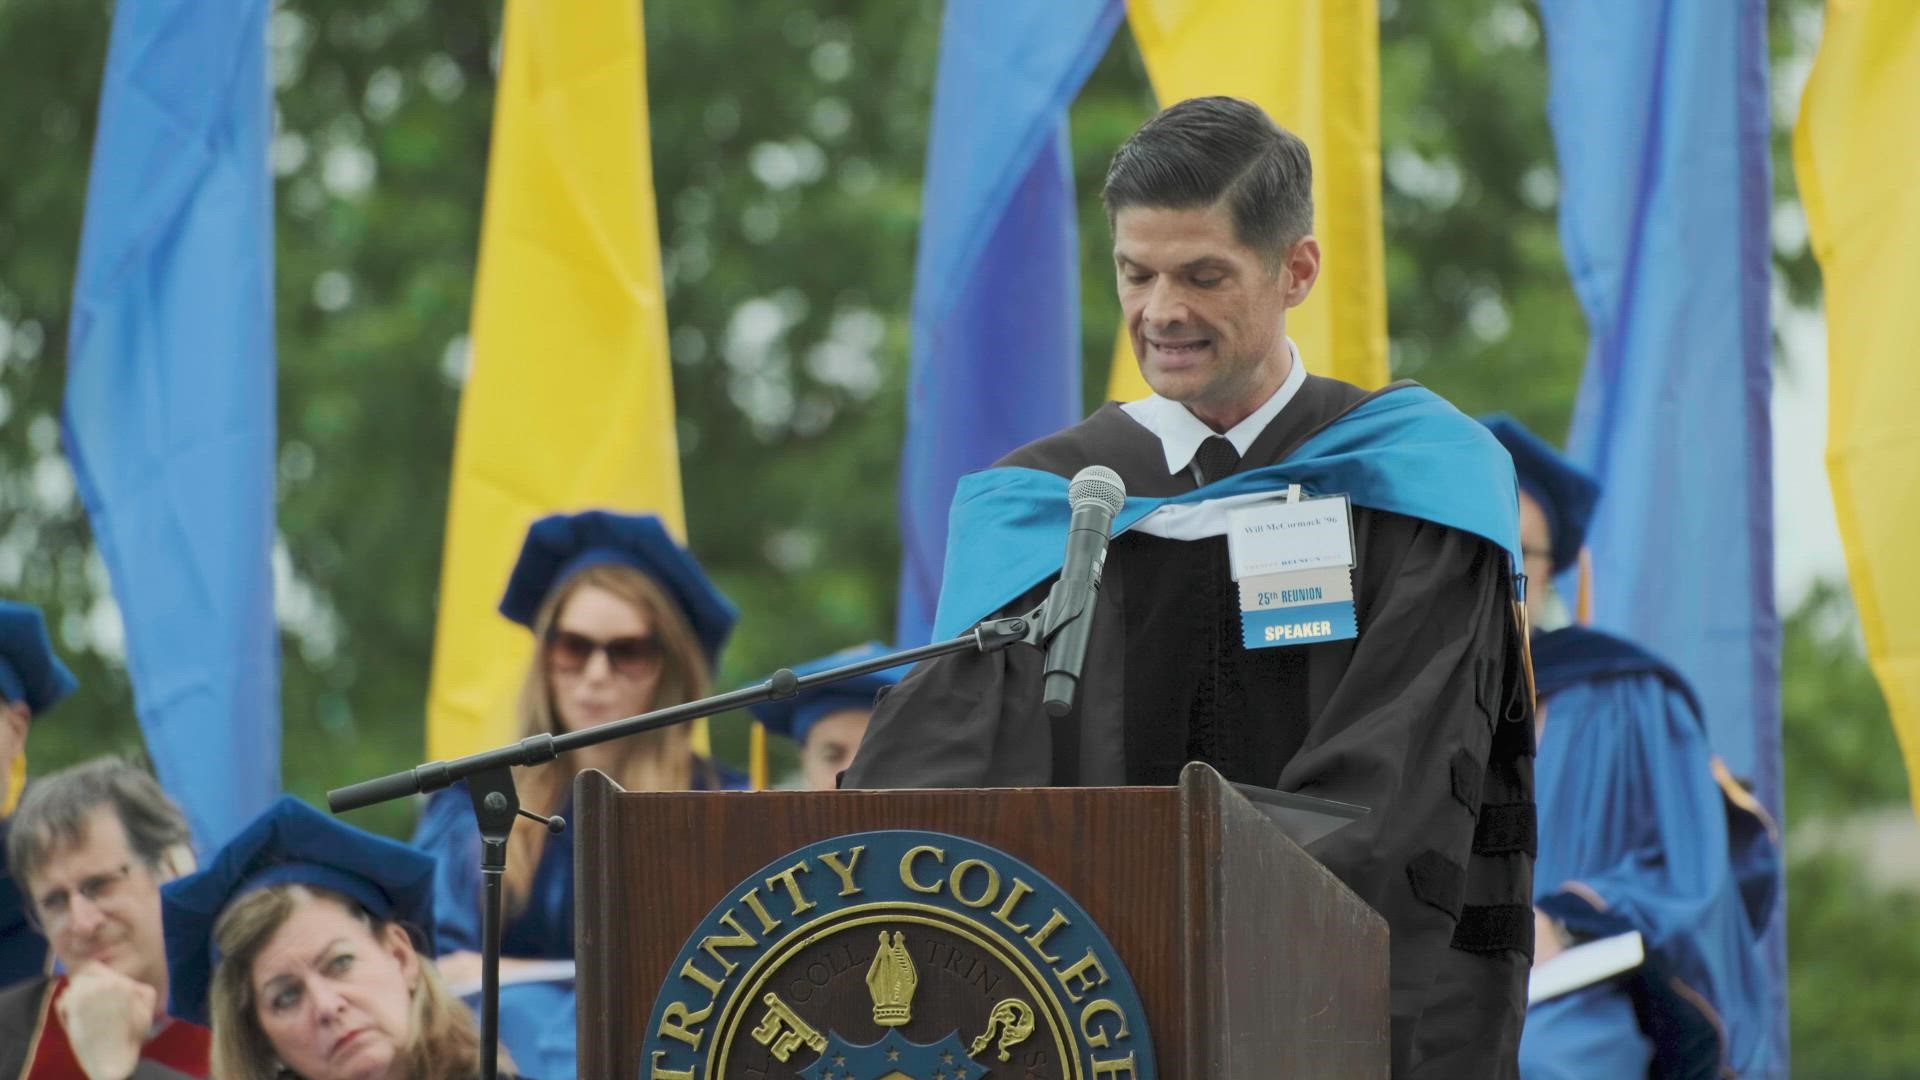 McCormack graduated from Trinity with a bachelor’s degree in English.